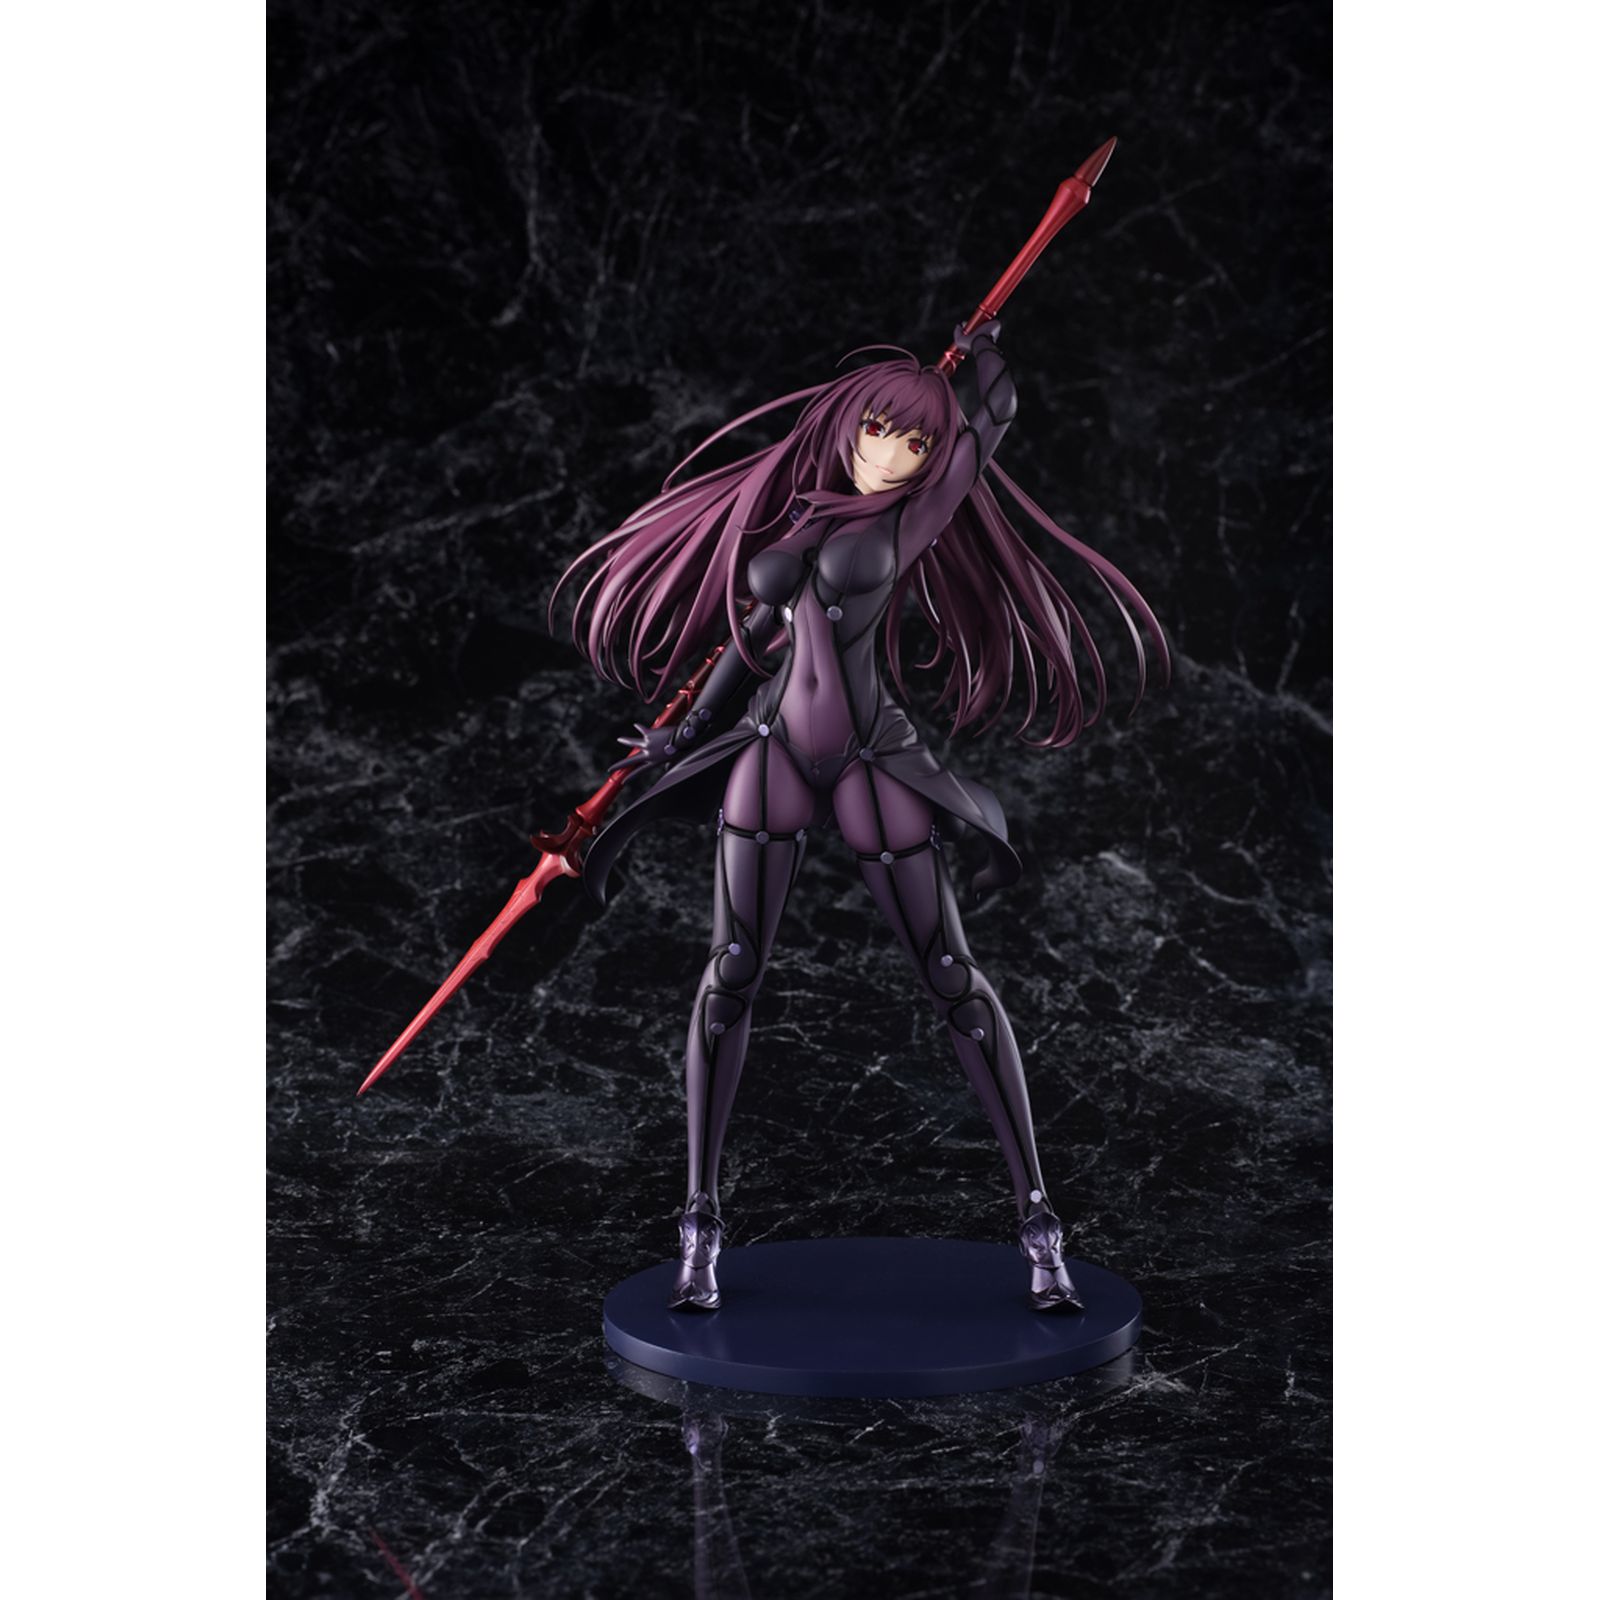 LANCER/SCATHACH FIG 31 CM FATE/GRAND ORDER 1/7 SCALE